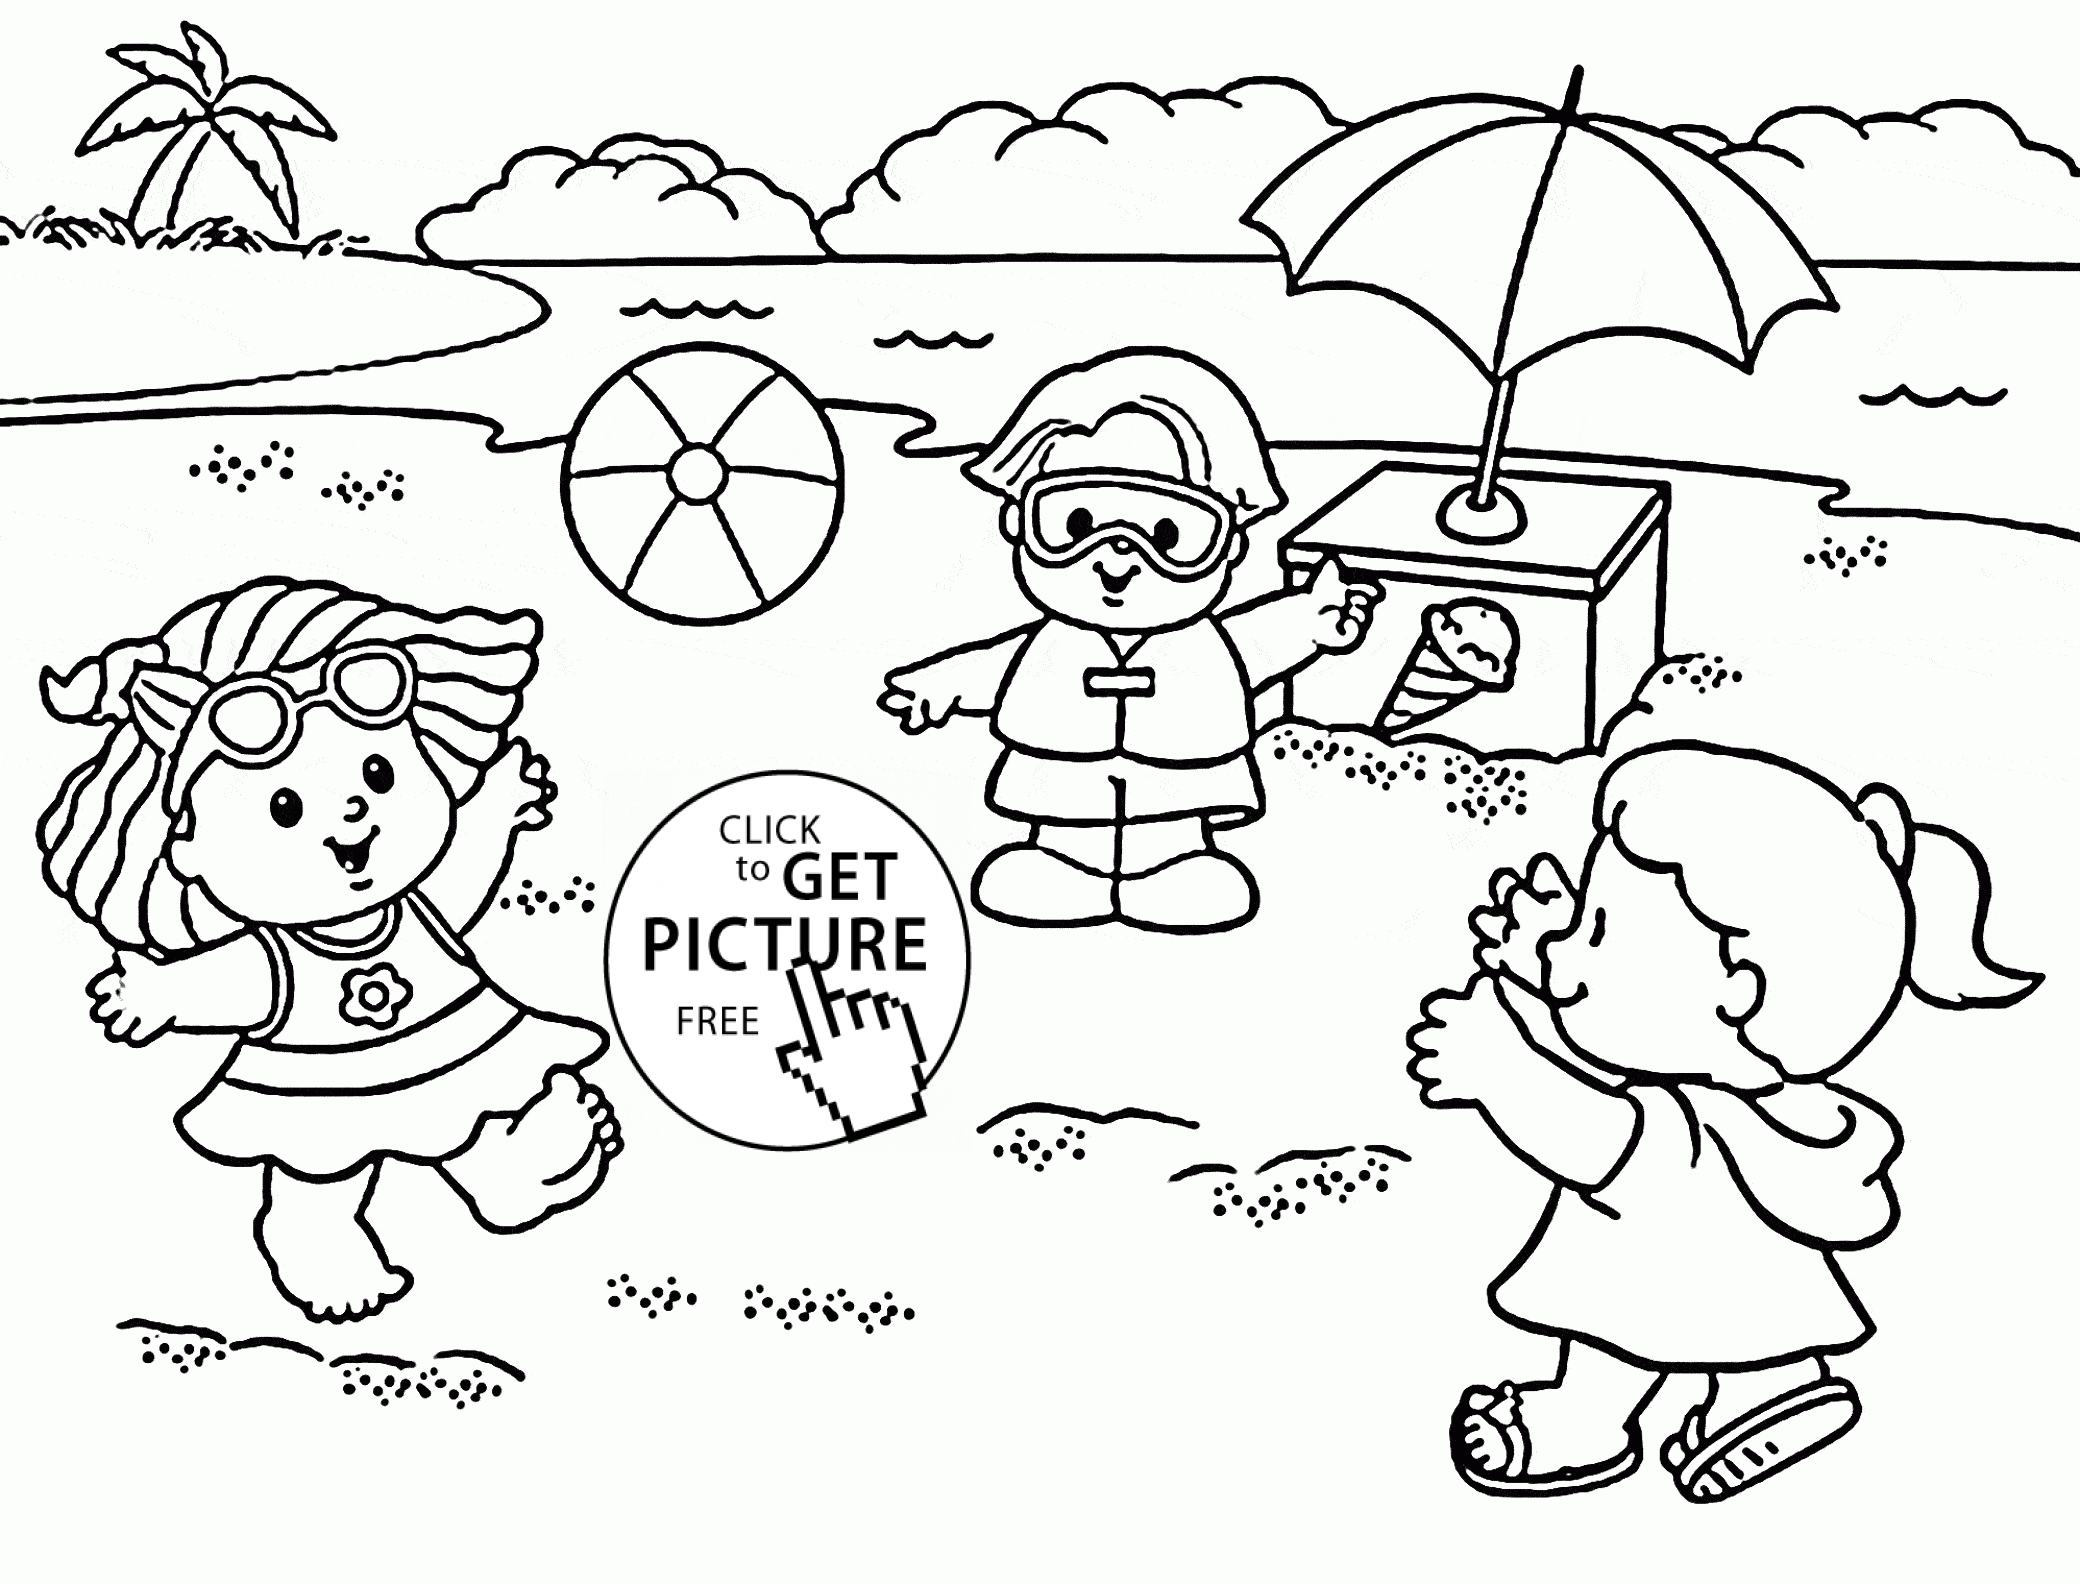 Download Summer Fun Coloring Page - Coloring Home